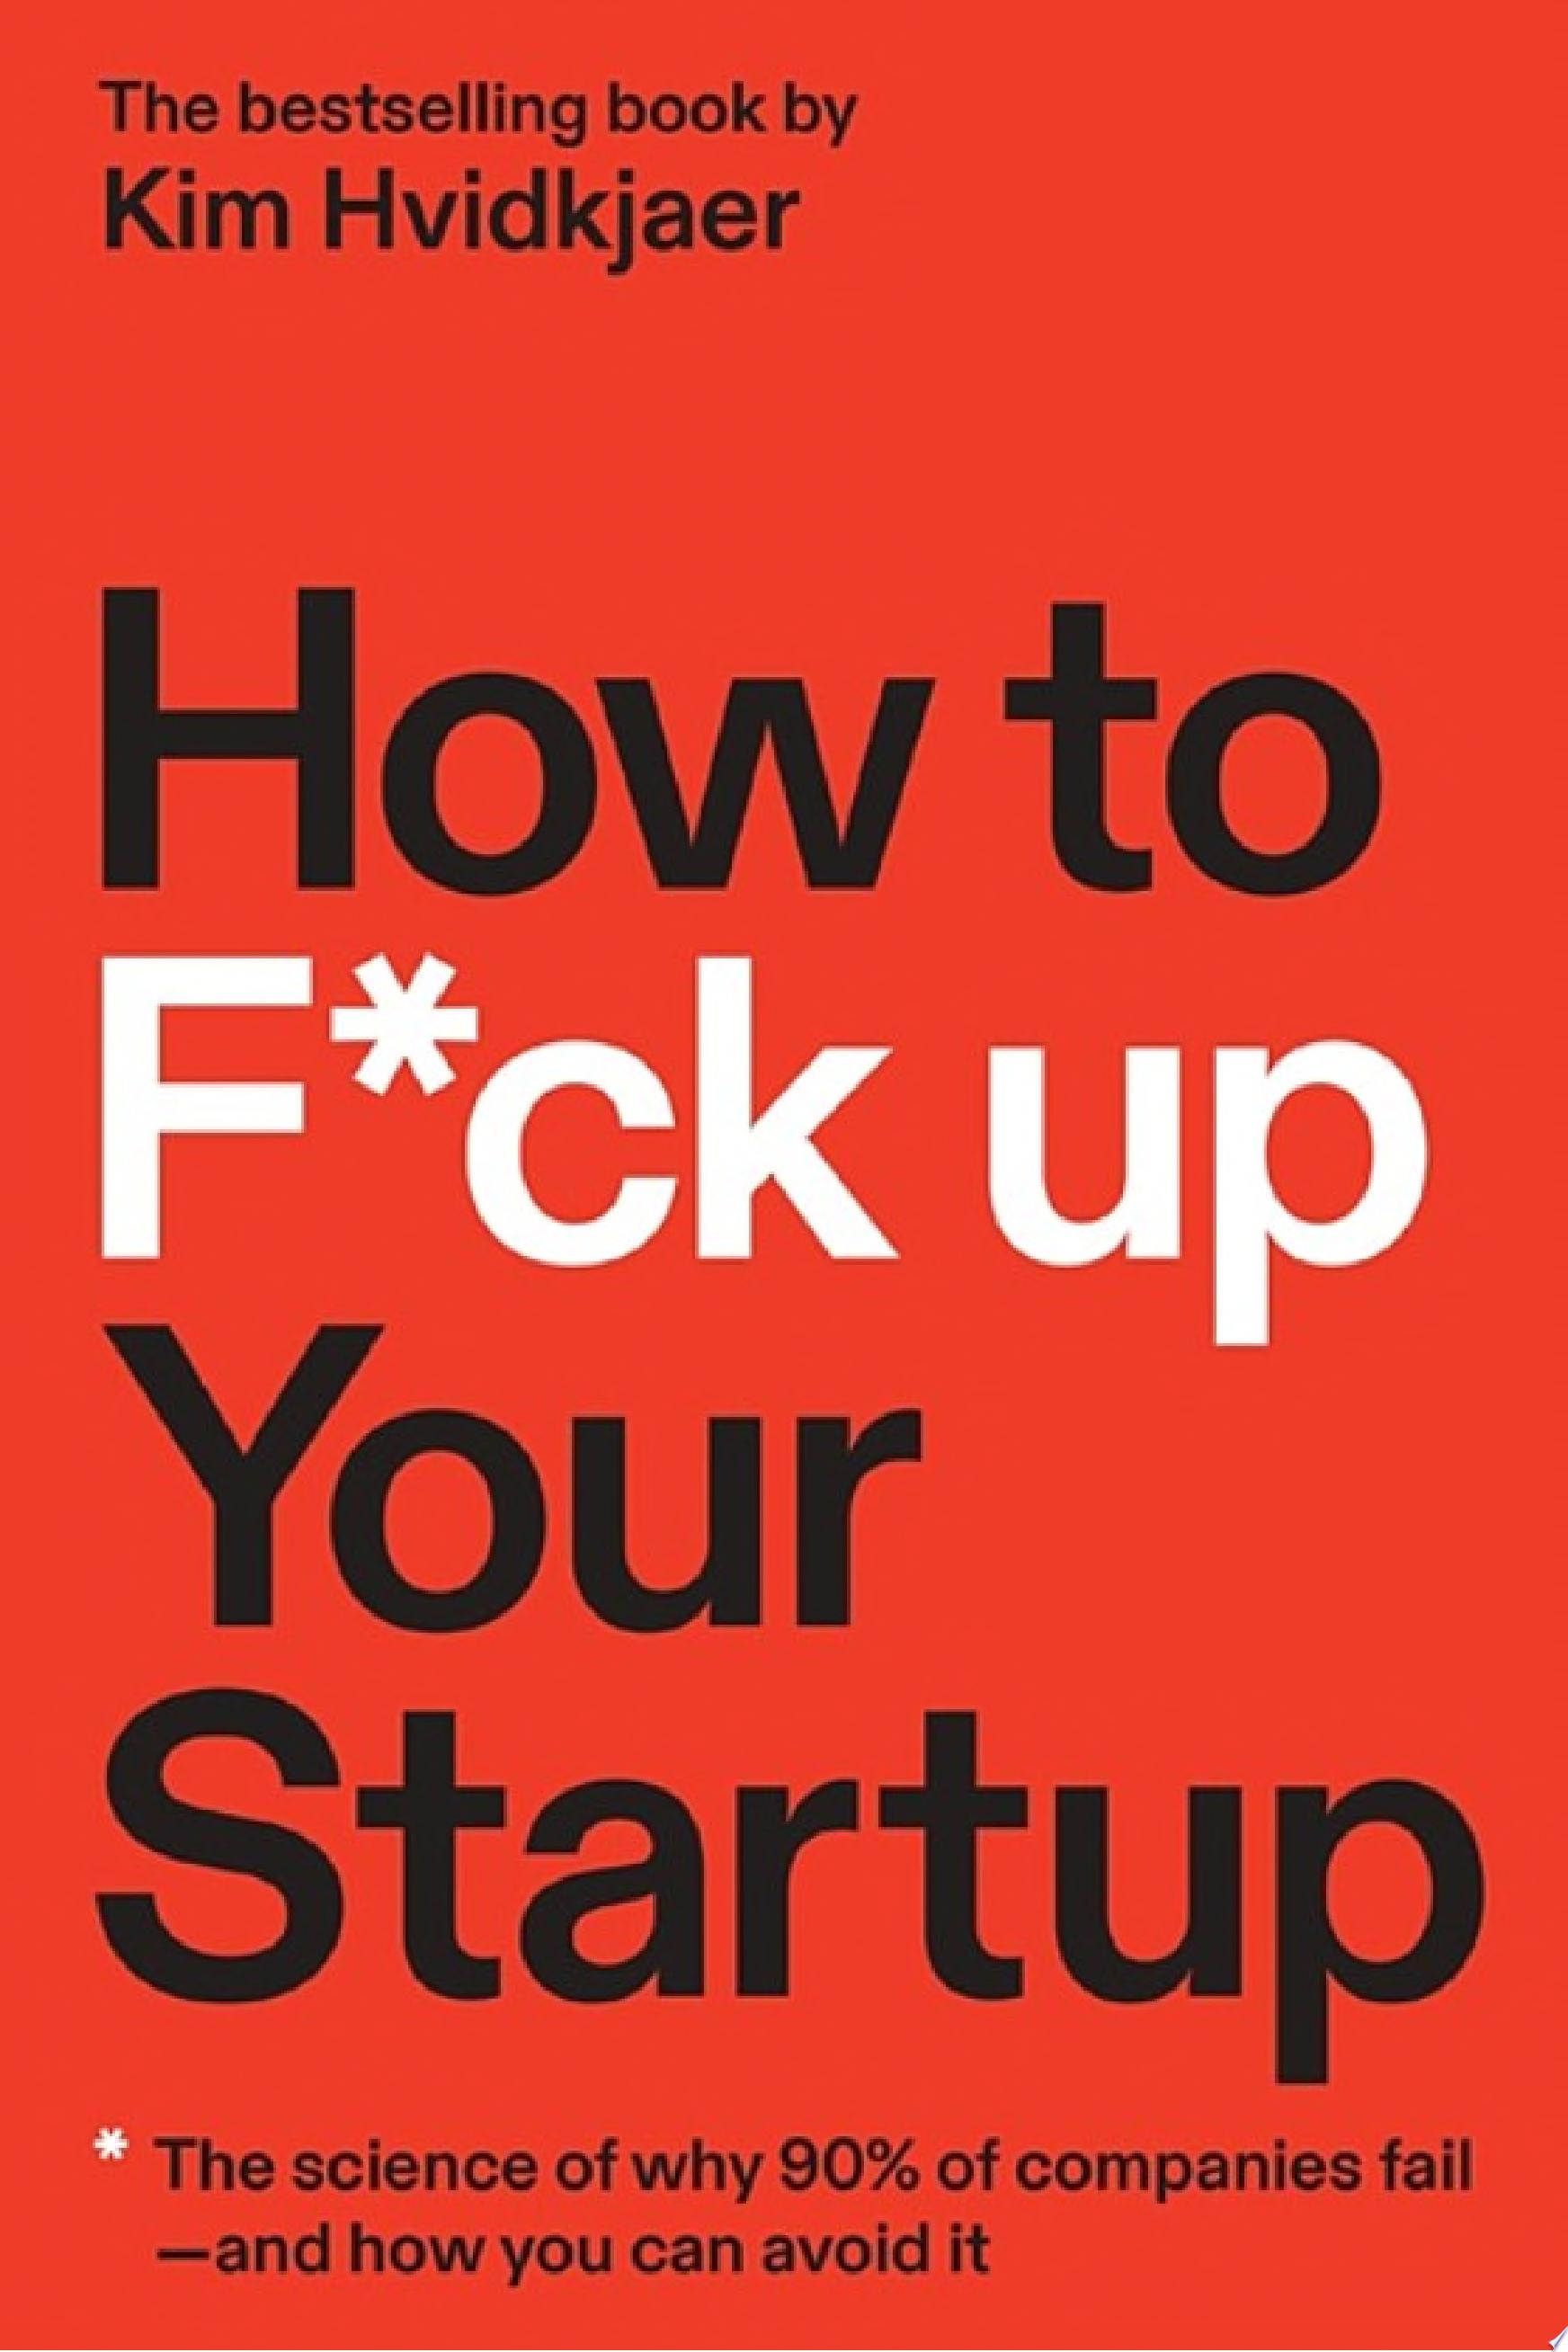 Image for "How to F*ck Up Your Startup"